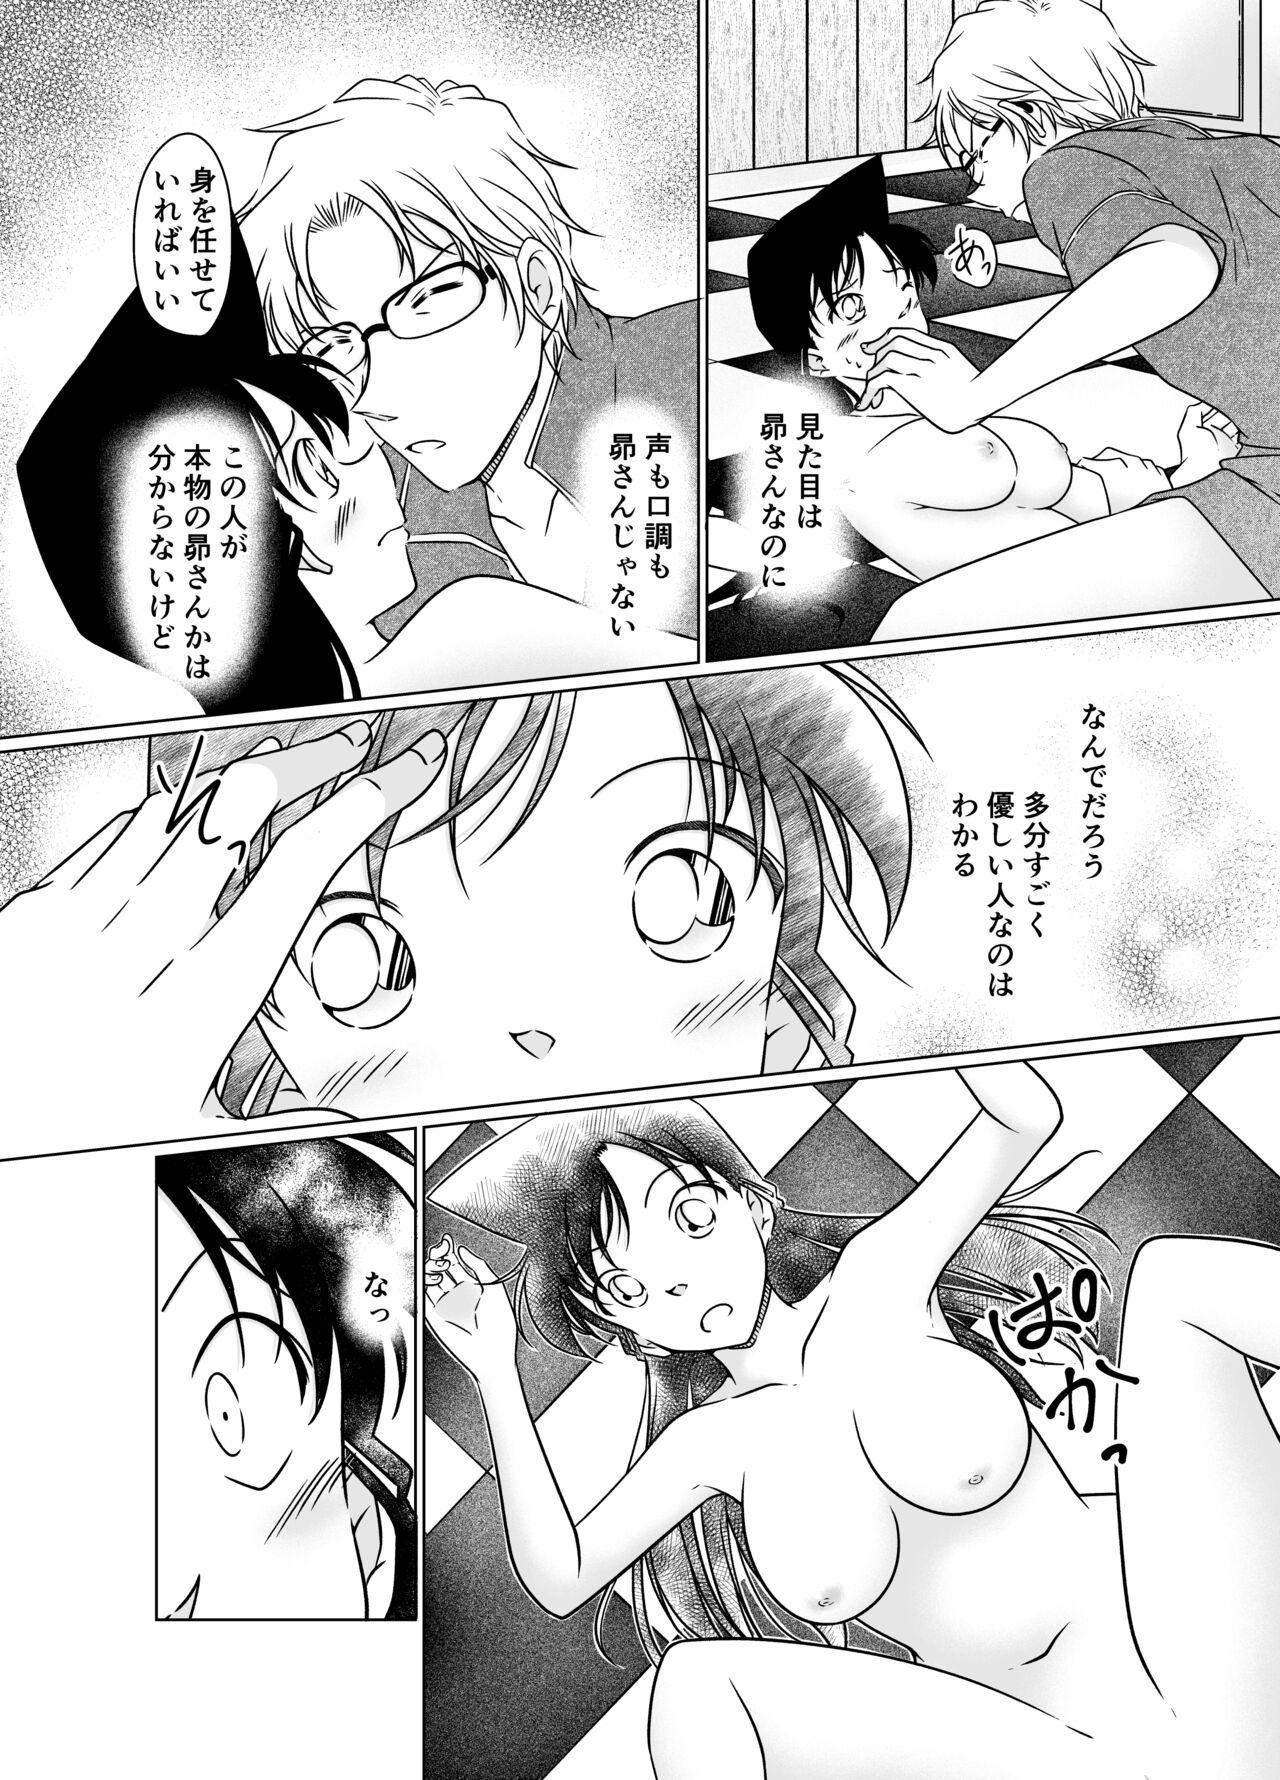 【Detective Conan】Something is wrong in the afternoon 22